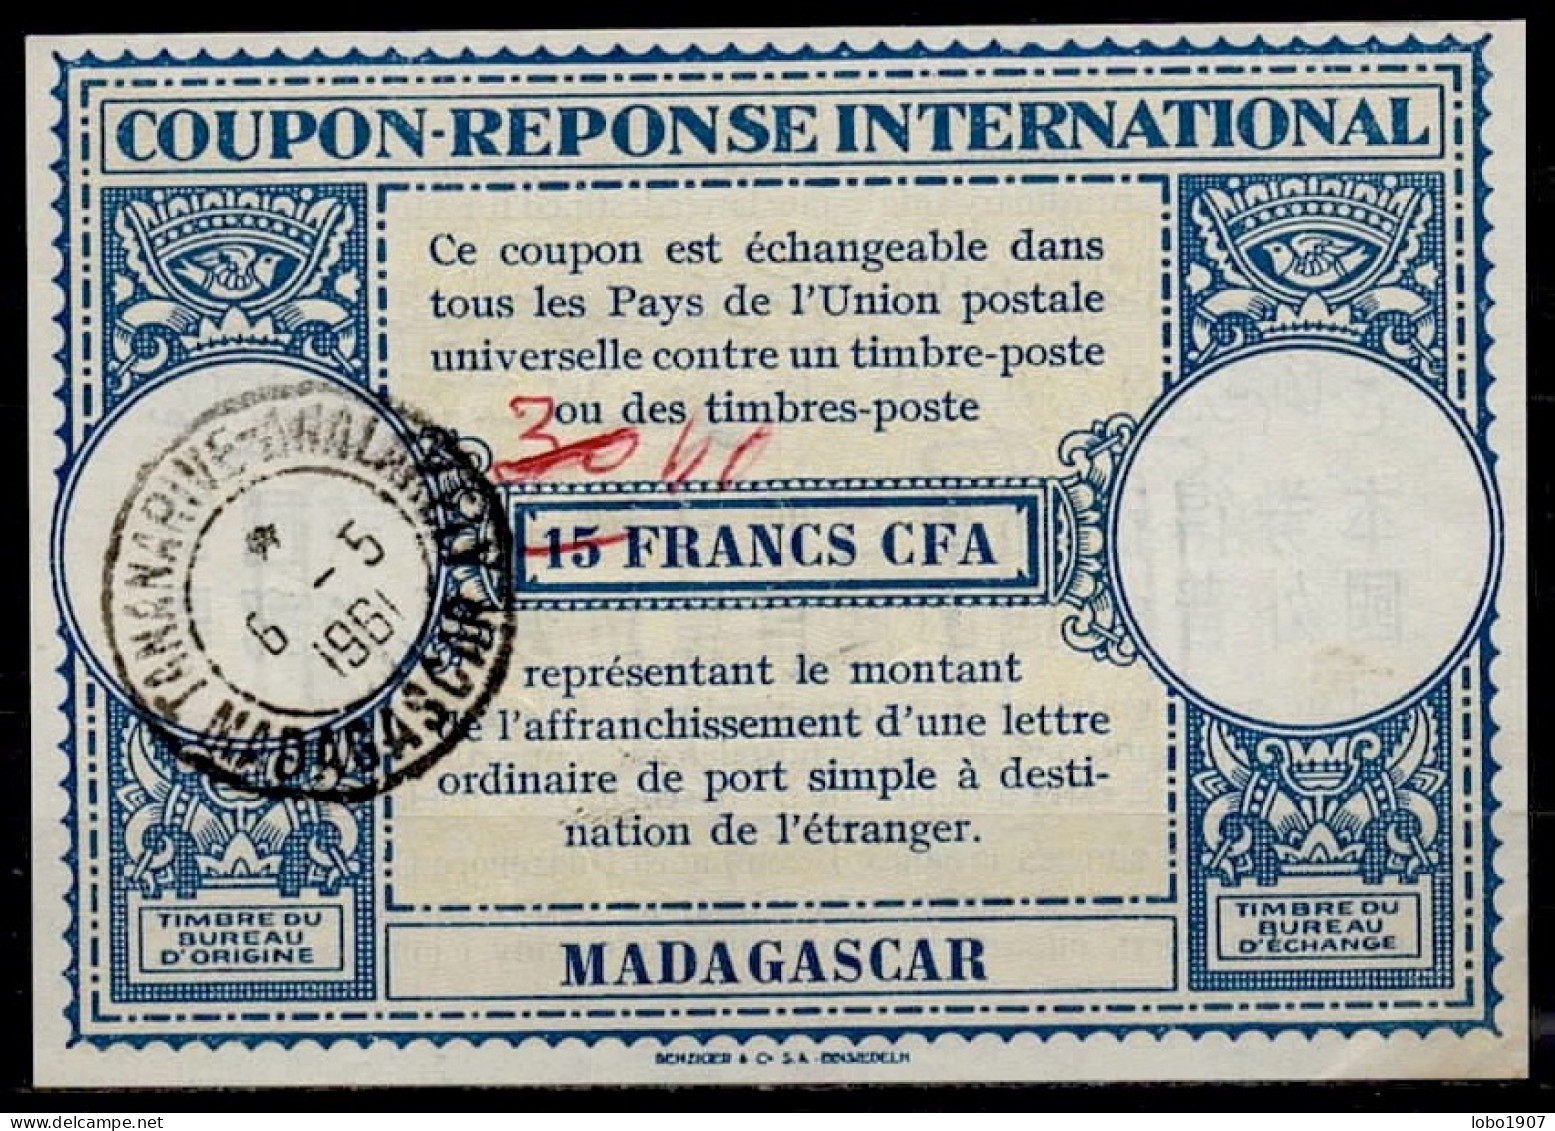 MADAGASCAR  Lo15  40 / 30 / 15 FRANCS CFA Int. Reply Coupon Reponse Antwortschein IRC IAS TANANARIVE ANALAKELY 06.05.61 - Storia Postale